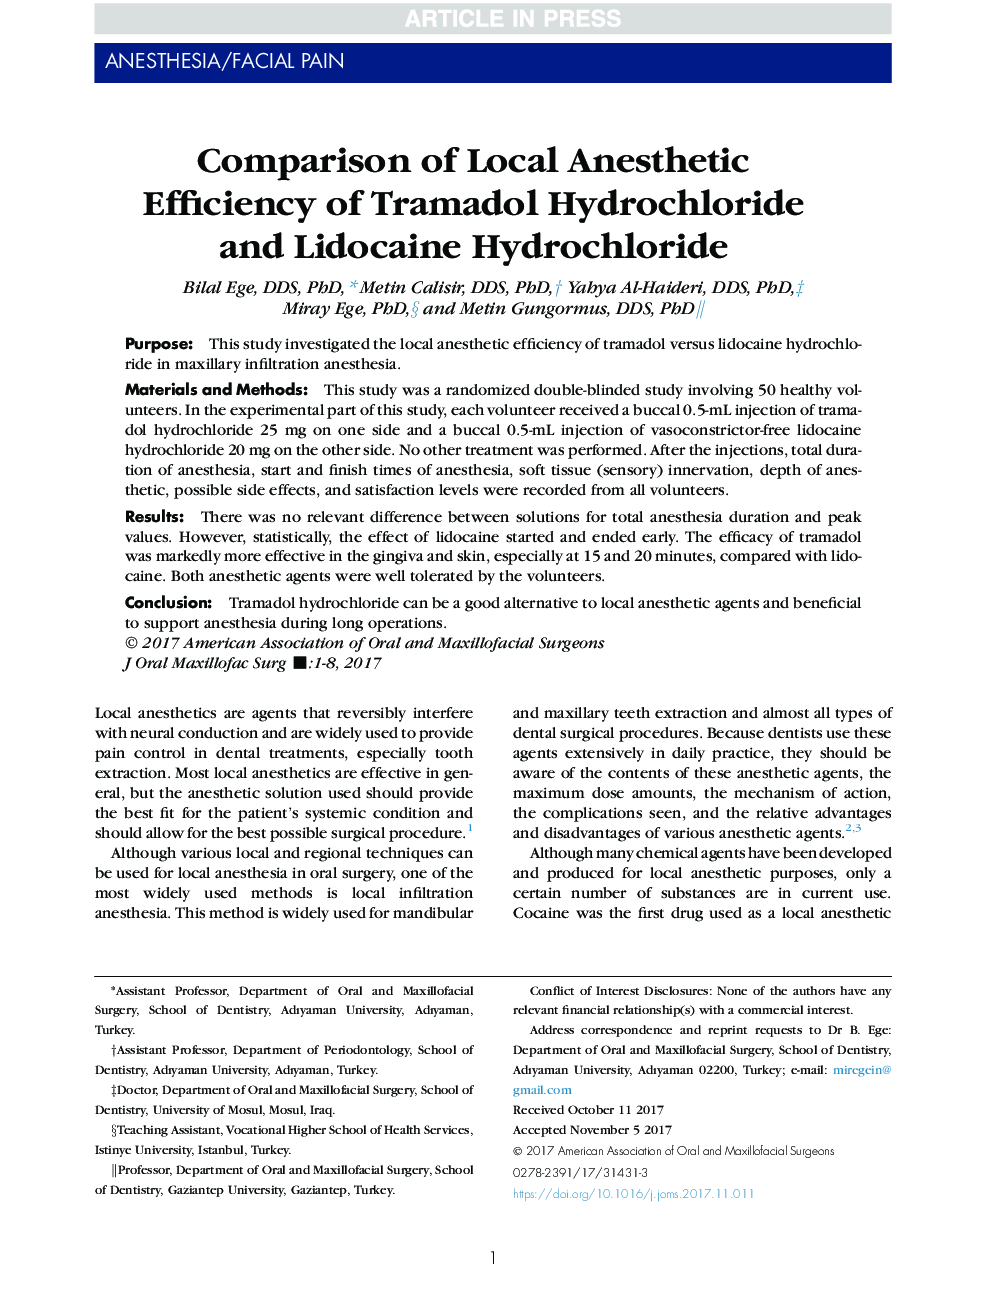 Comparison of Local Anesthetic Efficiency of Tramadol Hydrochloride and Lidocaine Hydrochloride